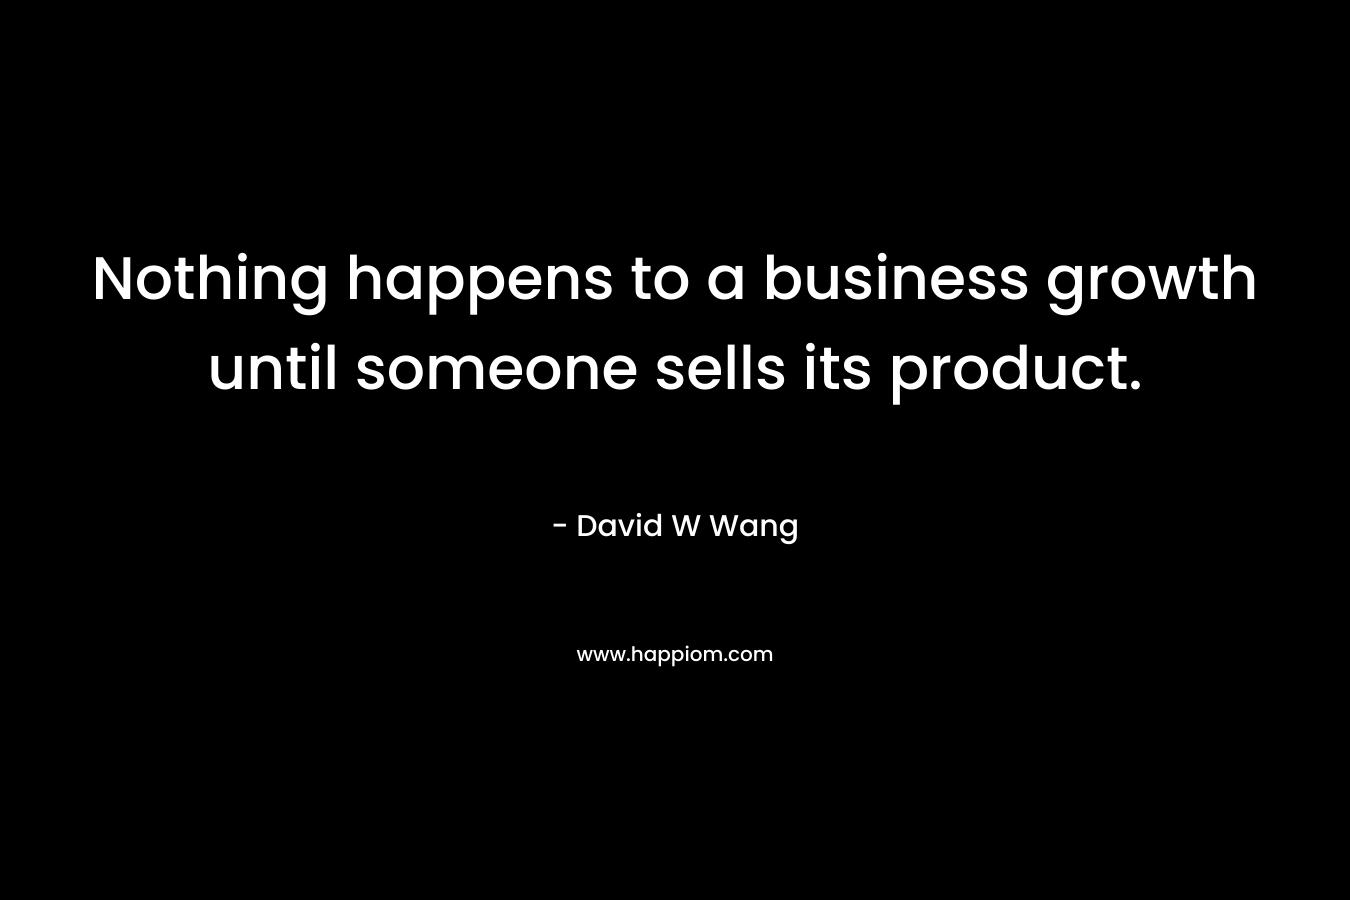 Nothing happens to a business growth until someone sells its product.